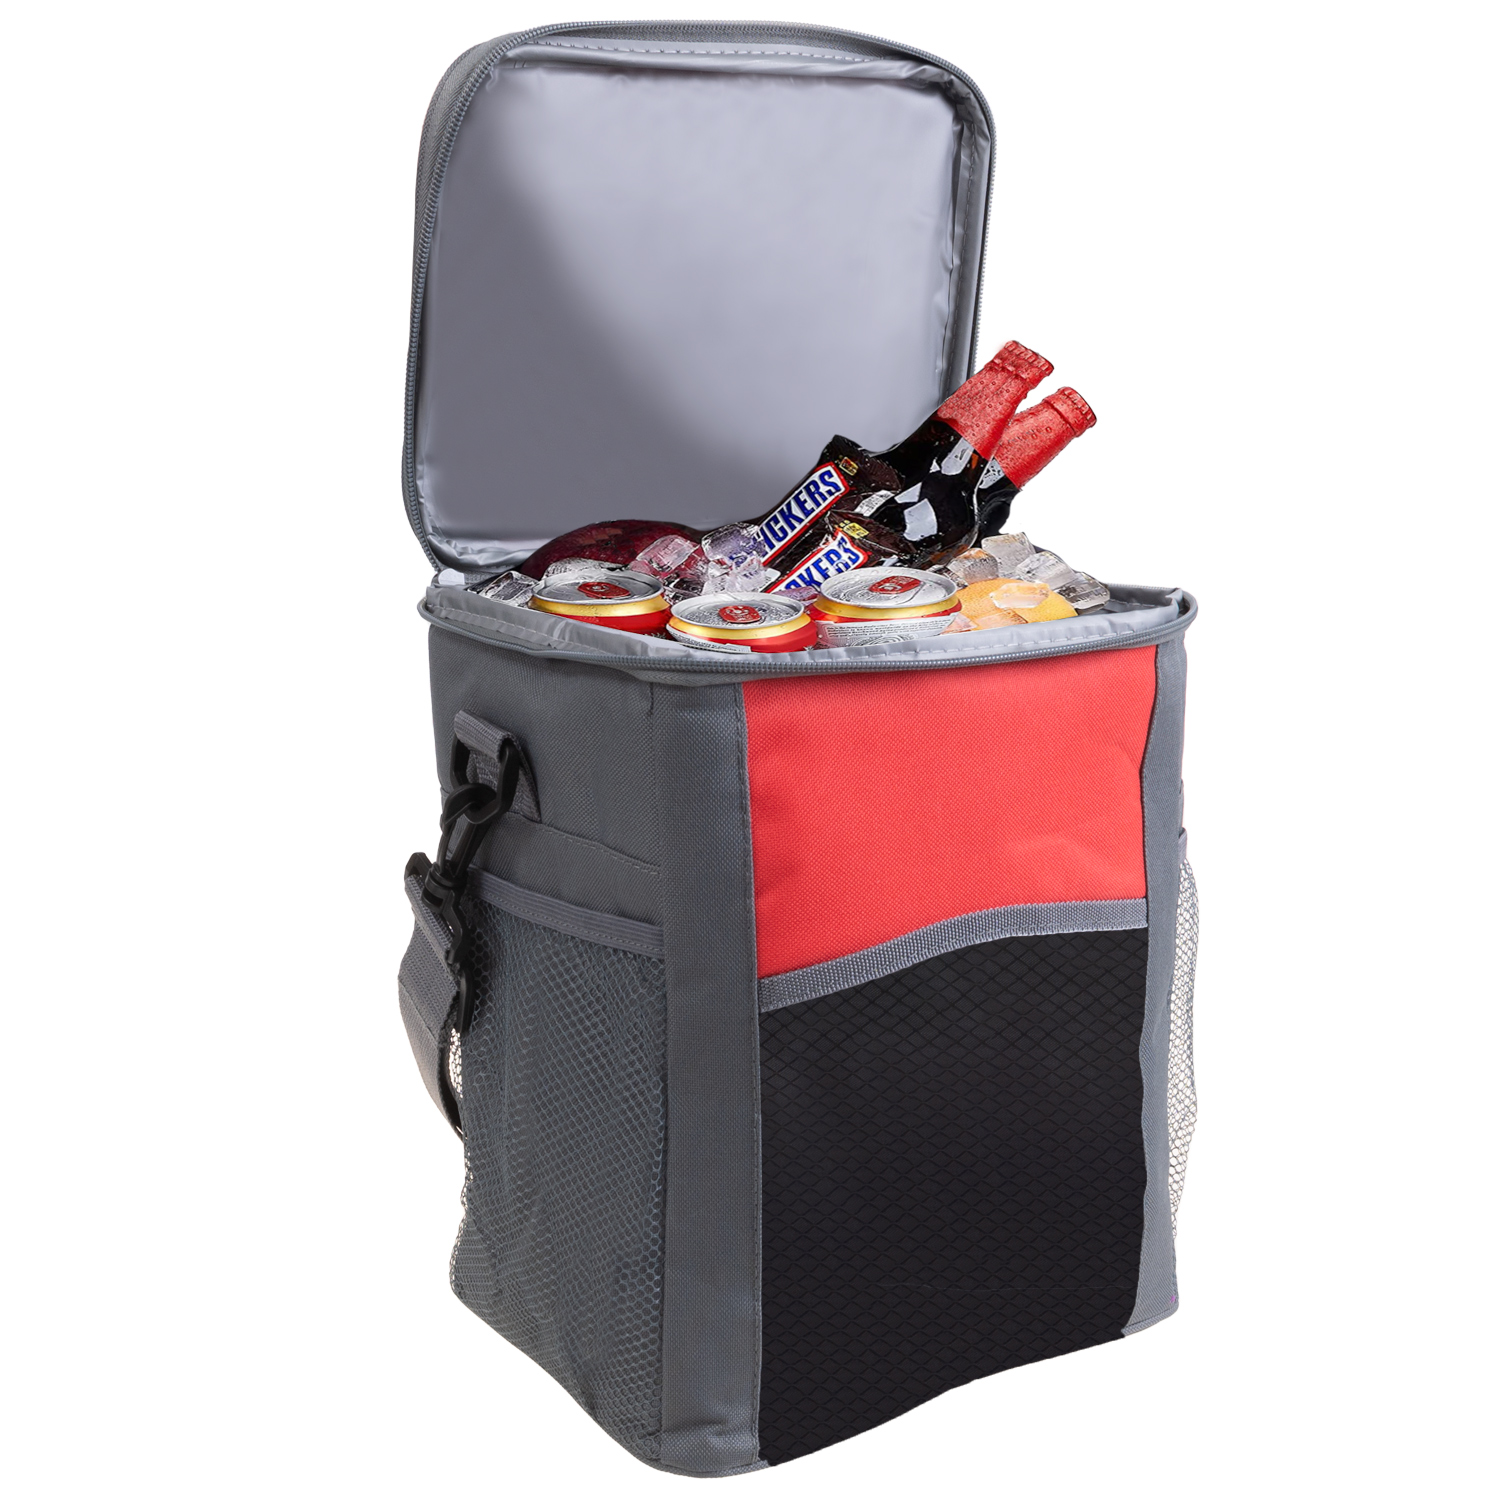 Medium insulated cooler bag, 18 can capacity - Red. Colour: red